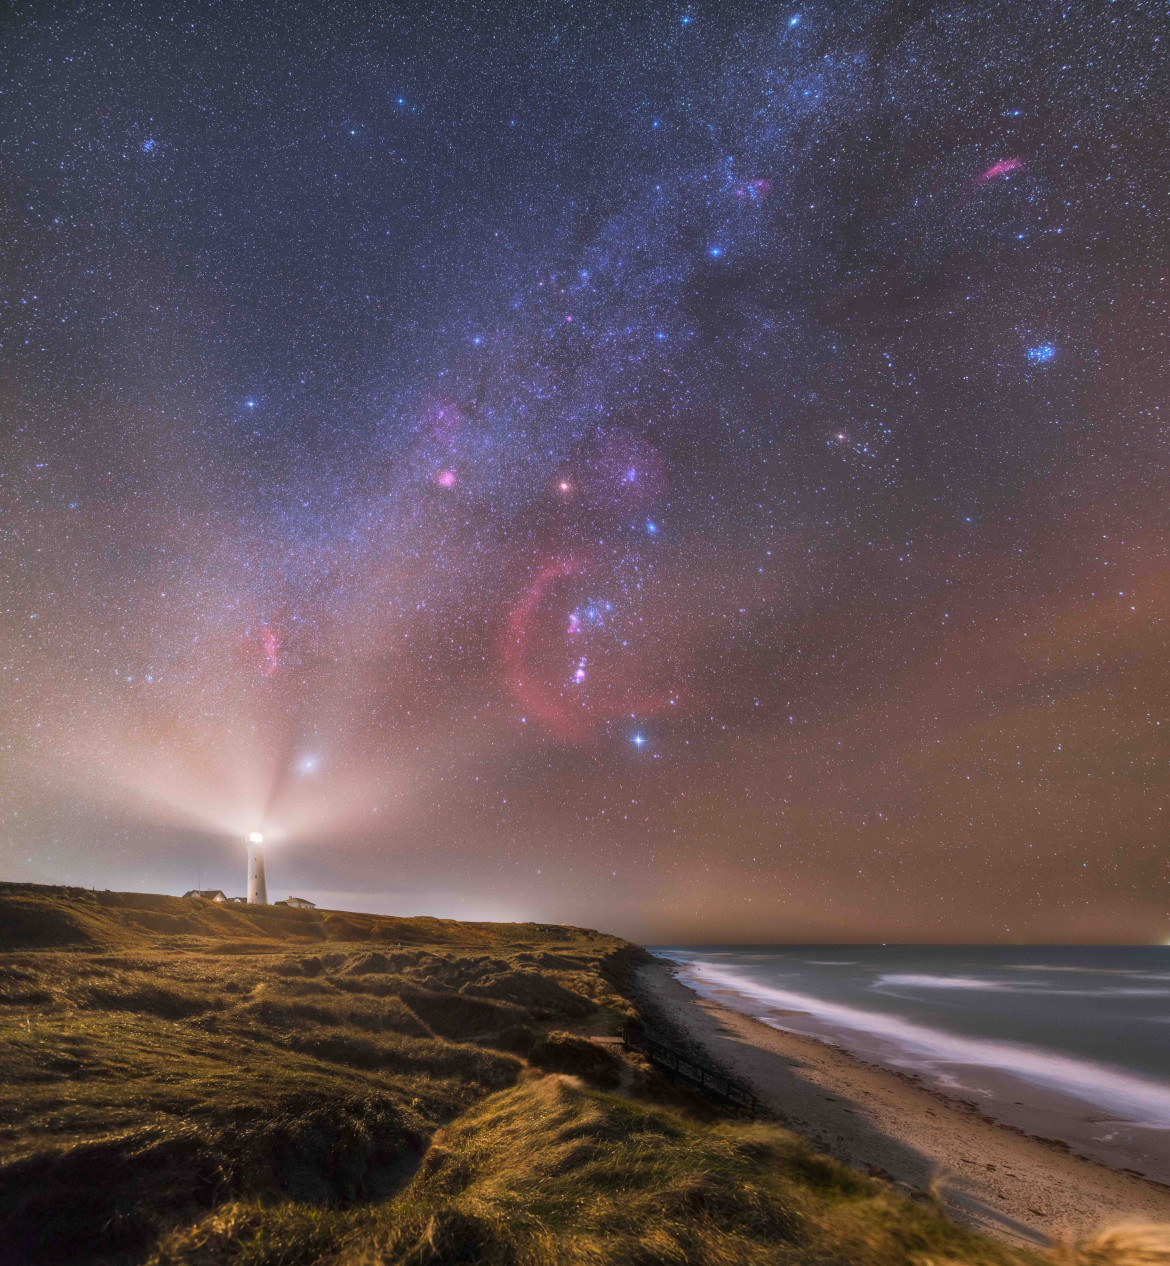 fot. Ruslan Merzlyakov, "Galactic Lighthouse", 2. miejsce w kategorii  Skyscapes / Insight Investment Astronomy Photographer of the Year 2019